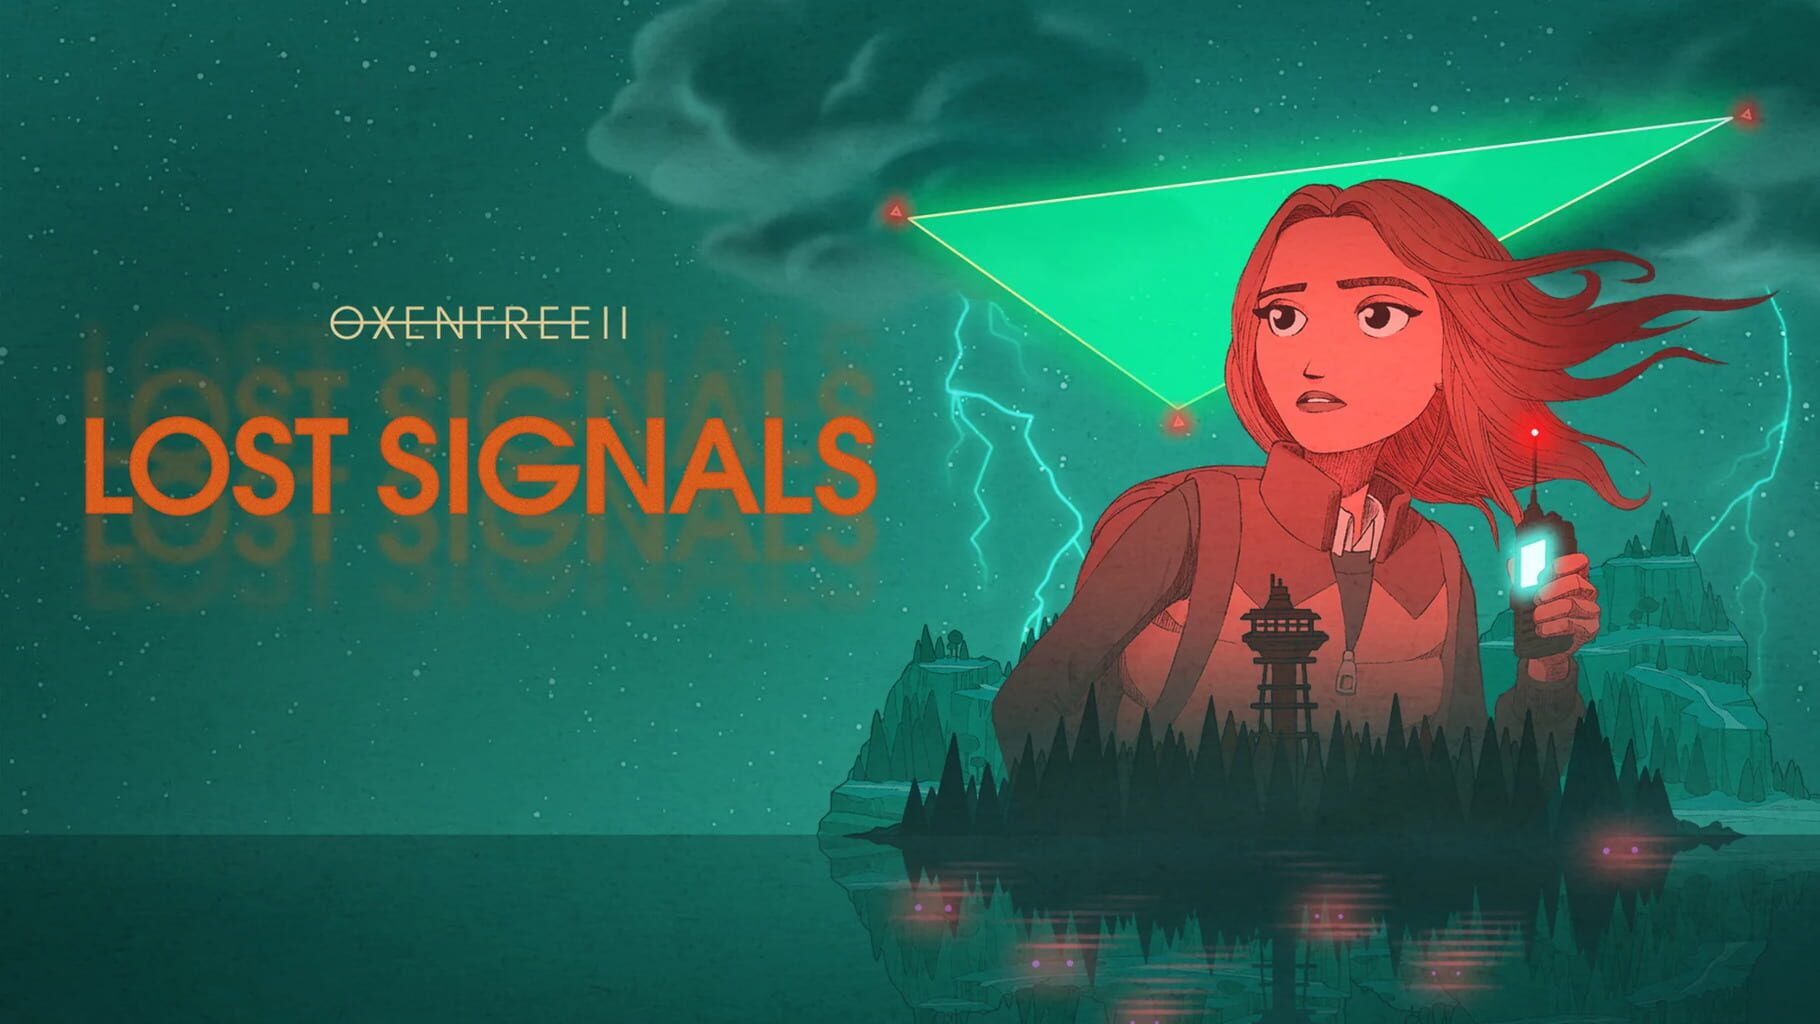 Artwork for Oxenfree II: Lost Signals